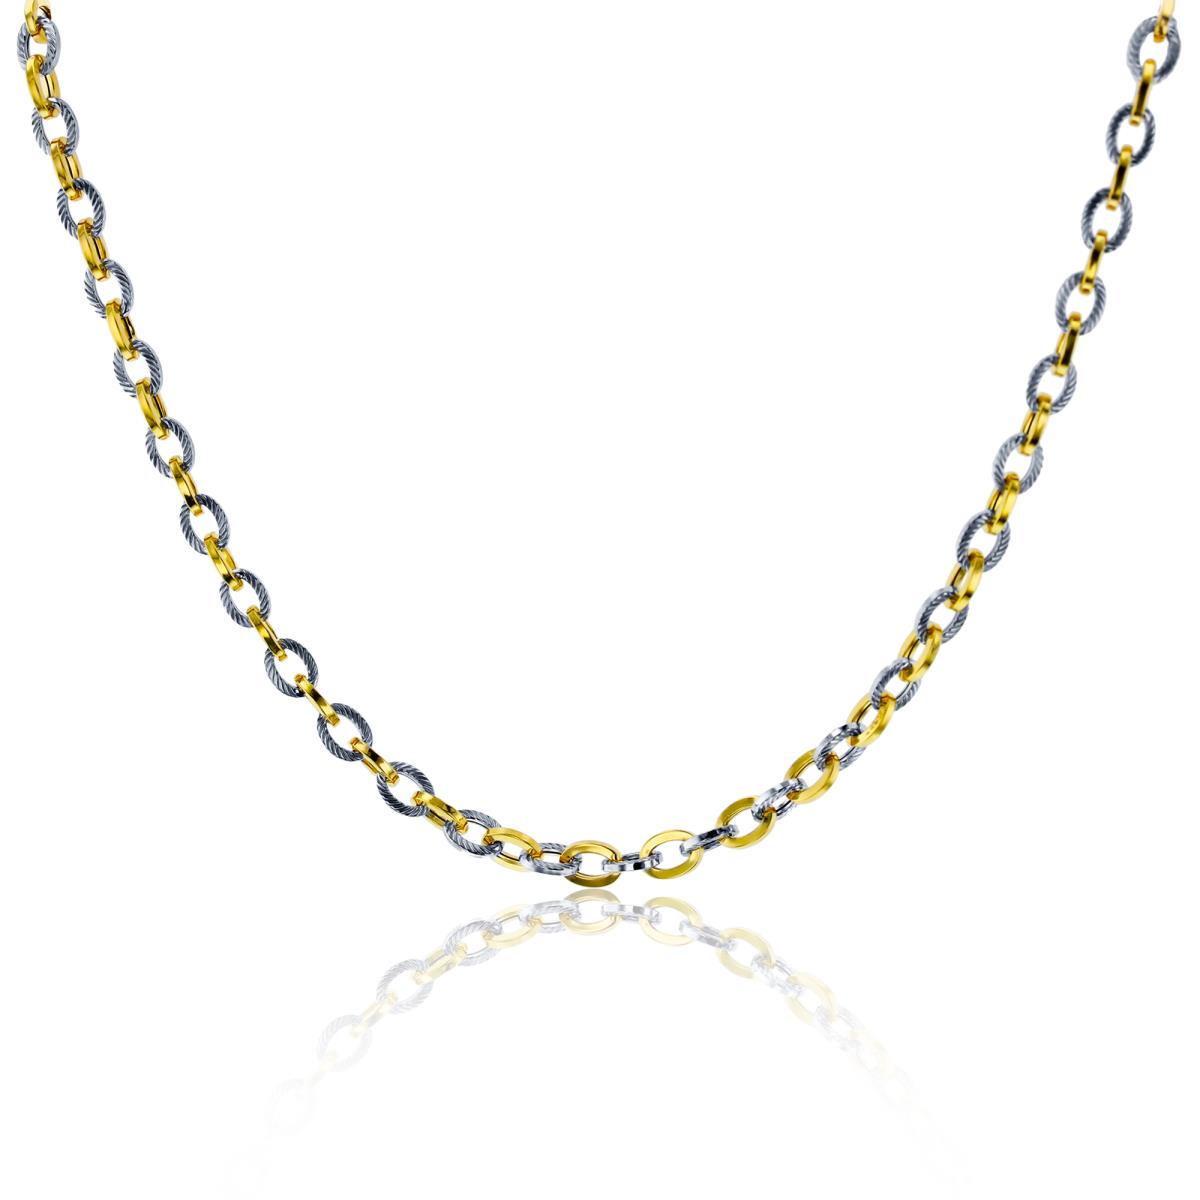 14K Two-Tone Gold Alternate Polished & Textured Open Oval Linked Italian 18"ext Necklace